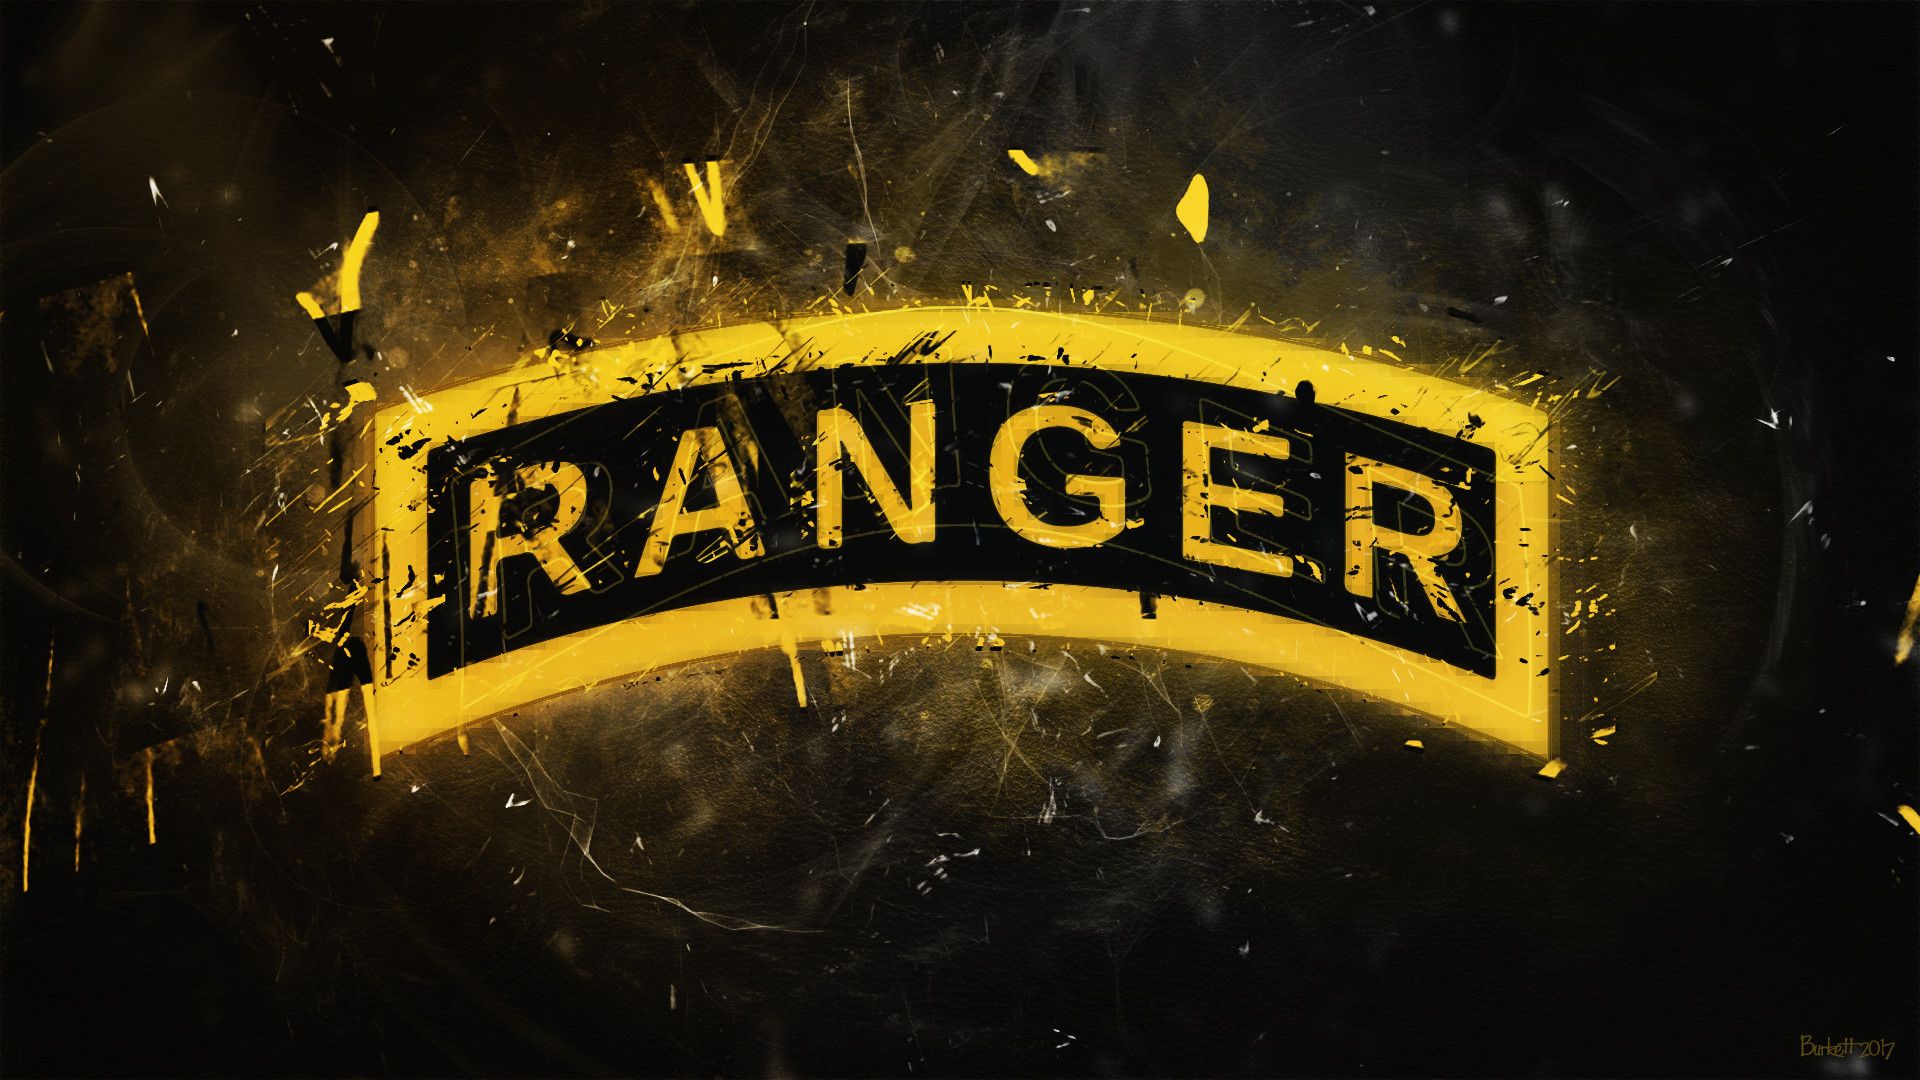 US Army Ranger wallpaper I made for iPhone  Us army Army rangers Us  army rangers